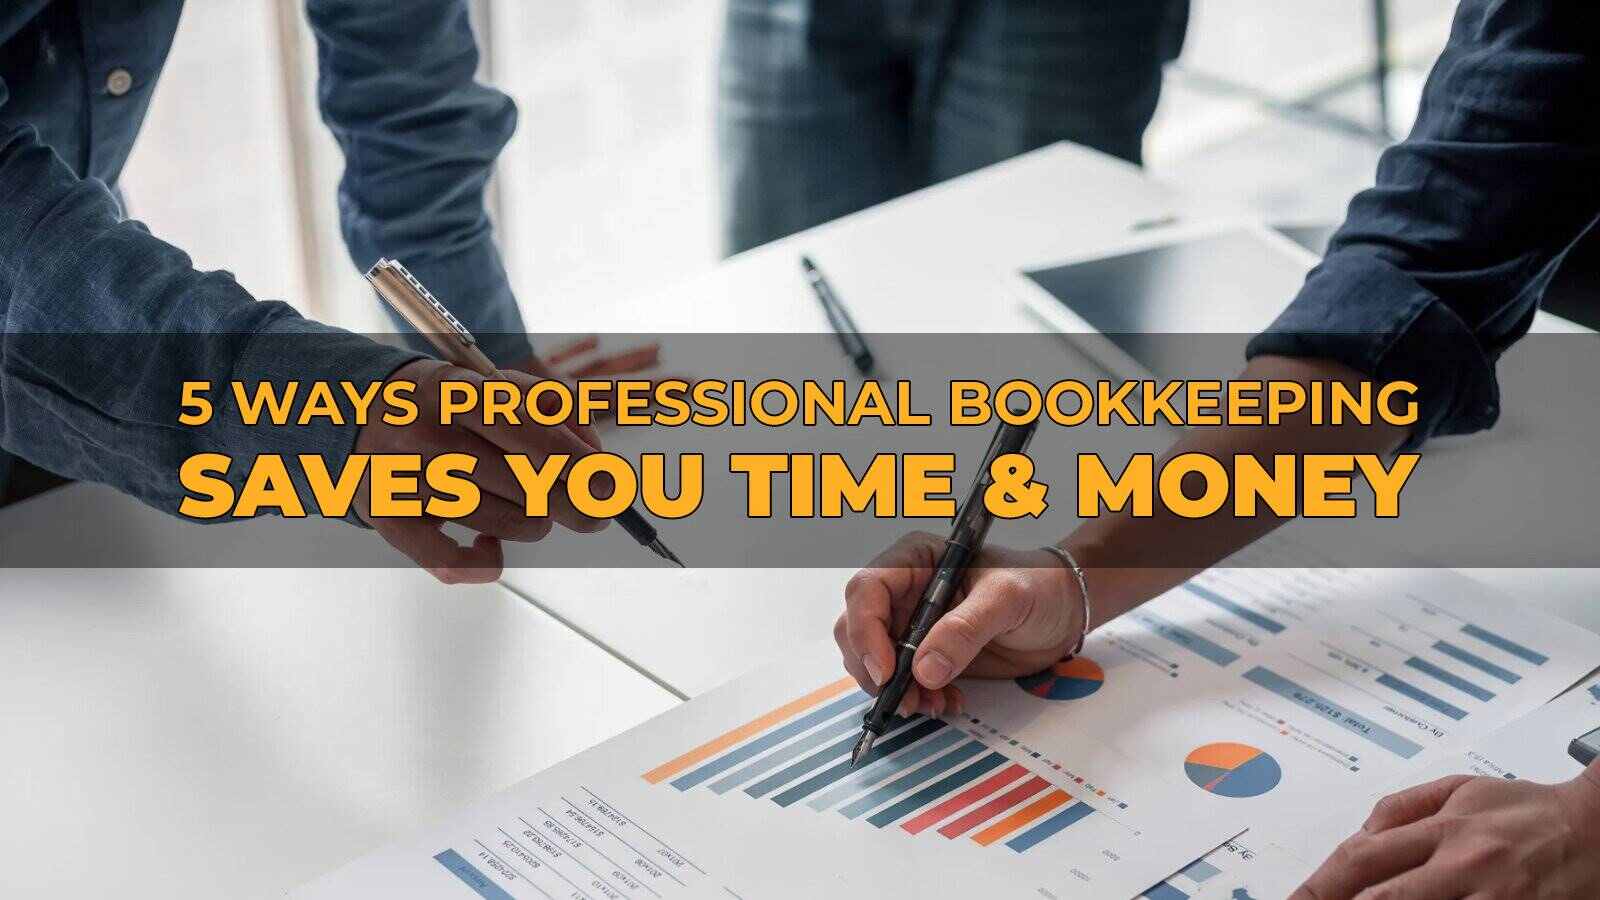 Ways For Professional Bookkeeping